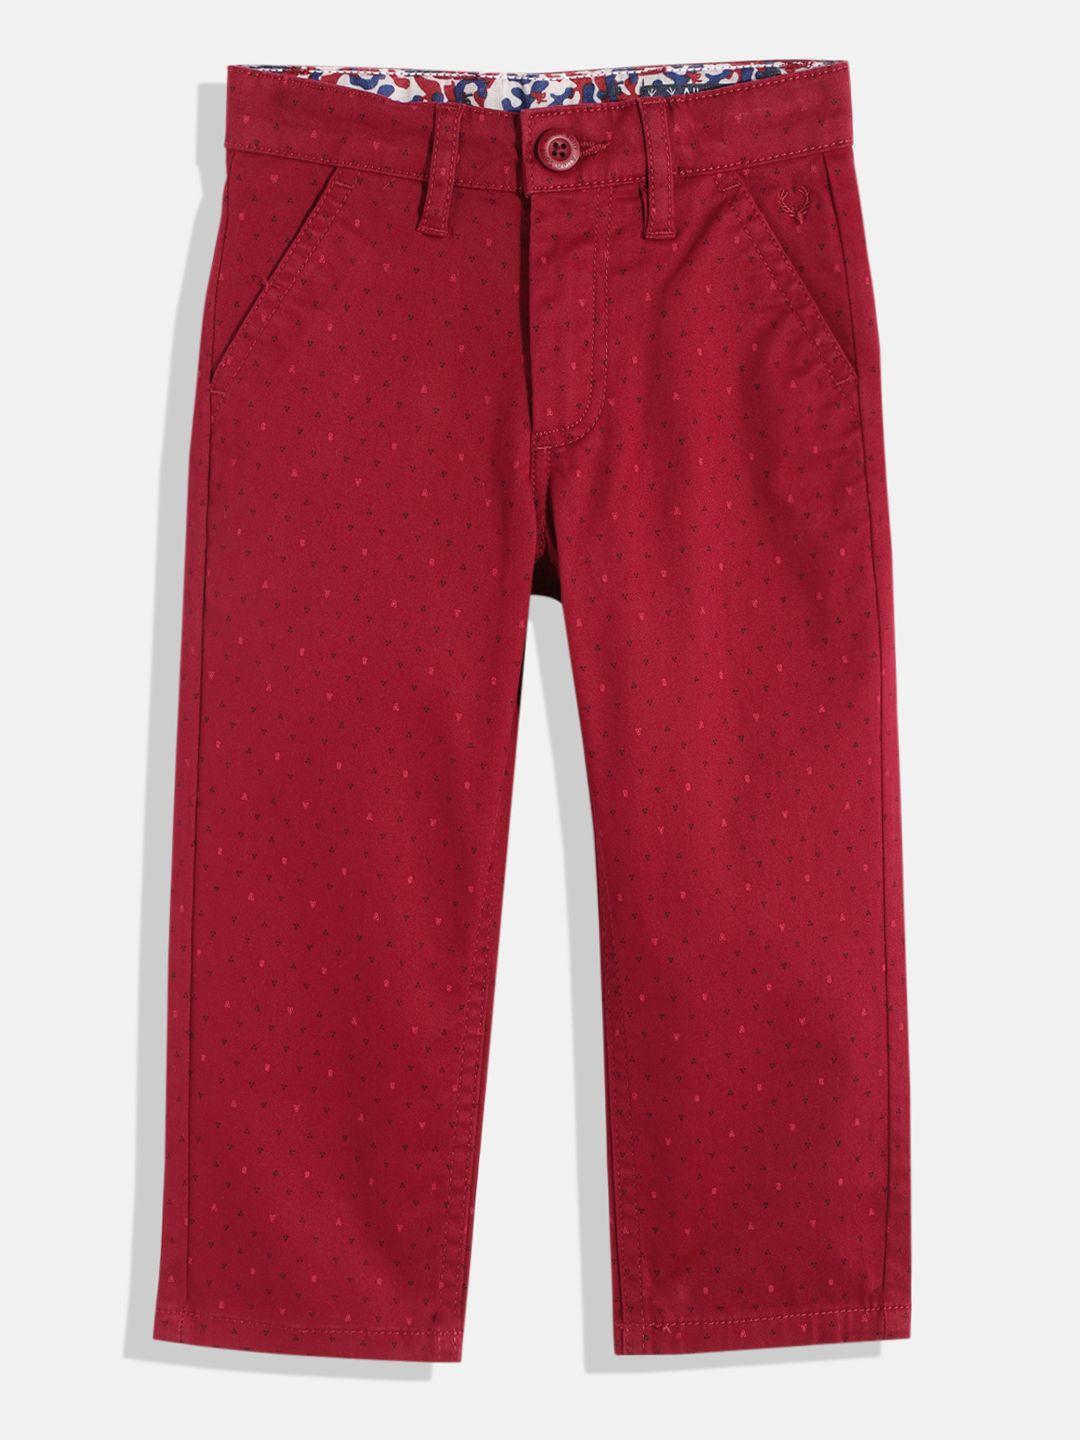 allen solly junior boys red printed chinos trousers